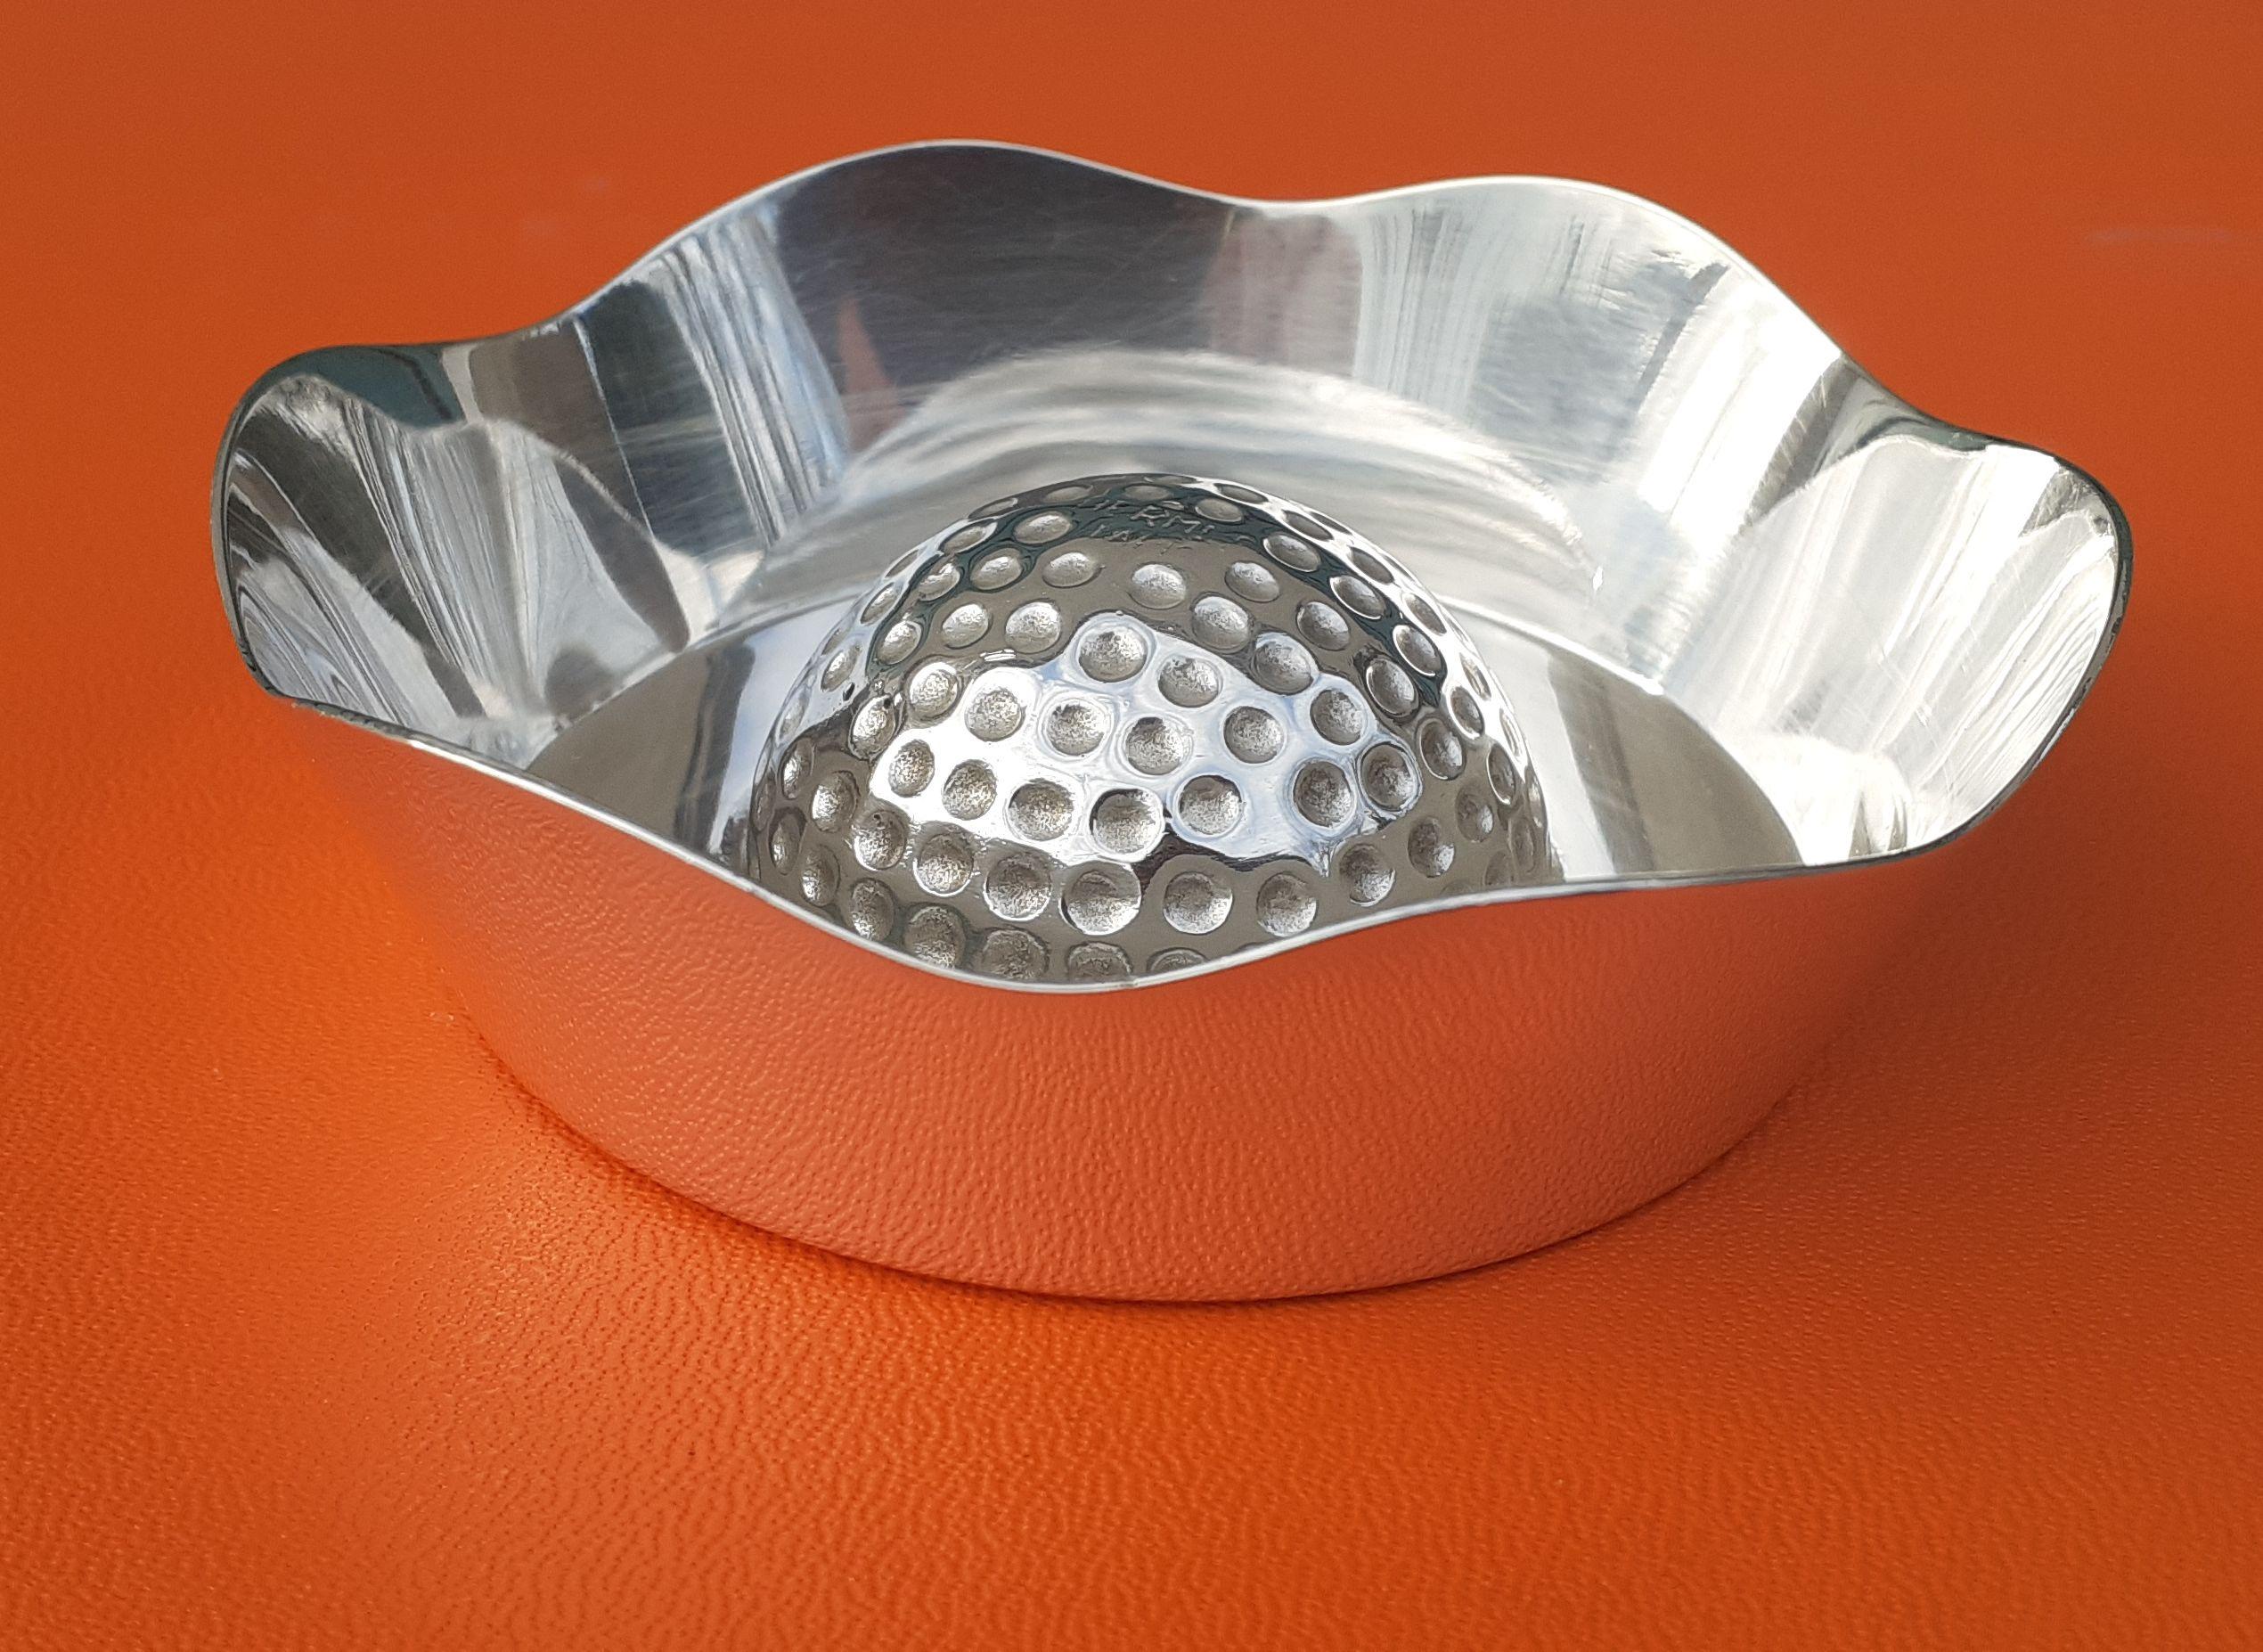 Rare Hermès Ashtray Change Tray Golf Ball Shaped Ravinet d'Enfert in Silver For Sale 5